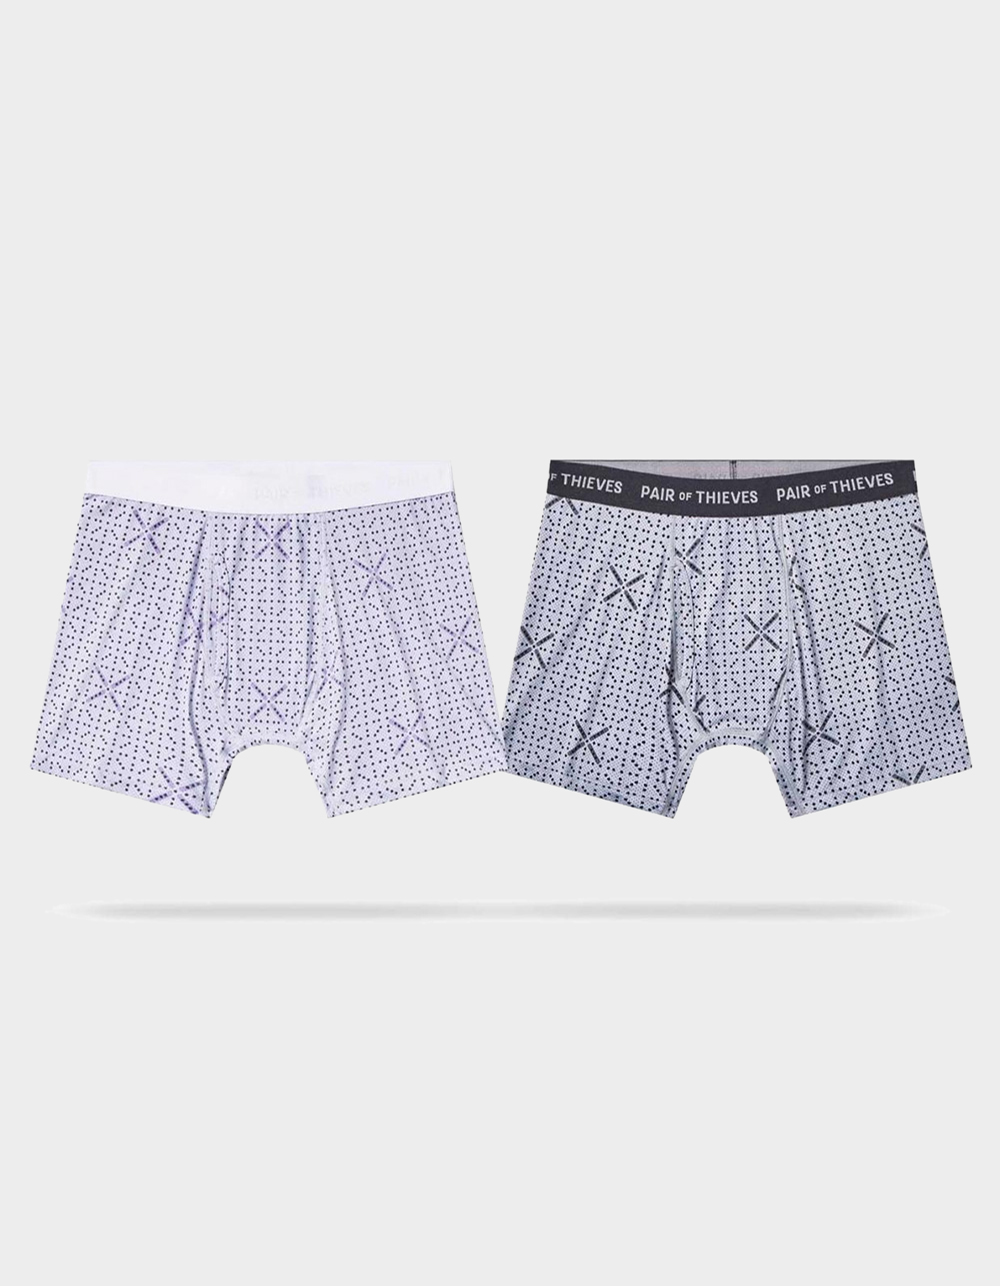 PAIR OF THIEVES Superfit Mens 2 Pack Boxer Briefs - GRAY COMBO